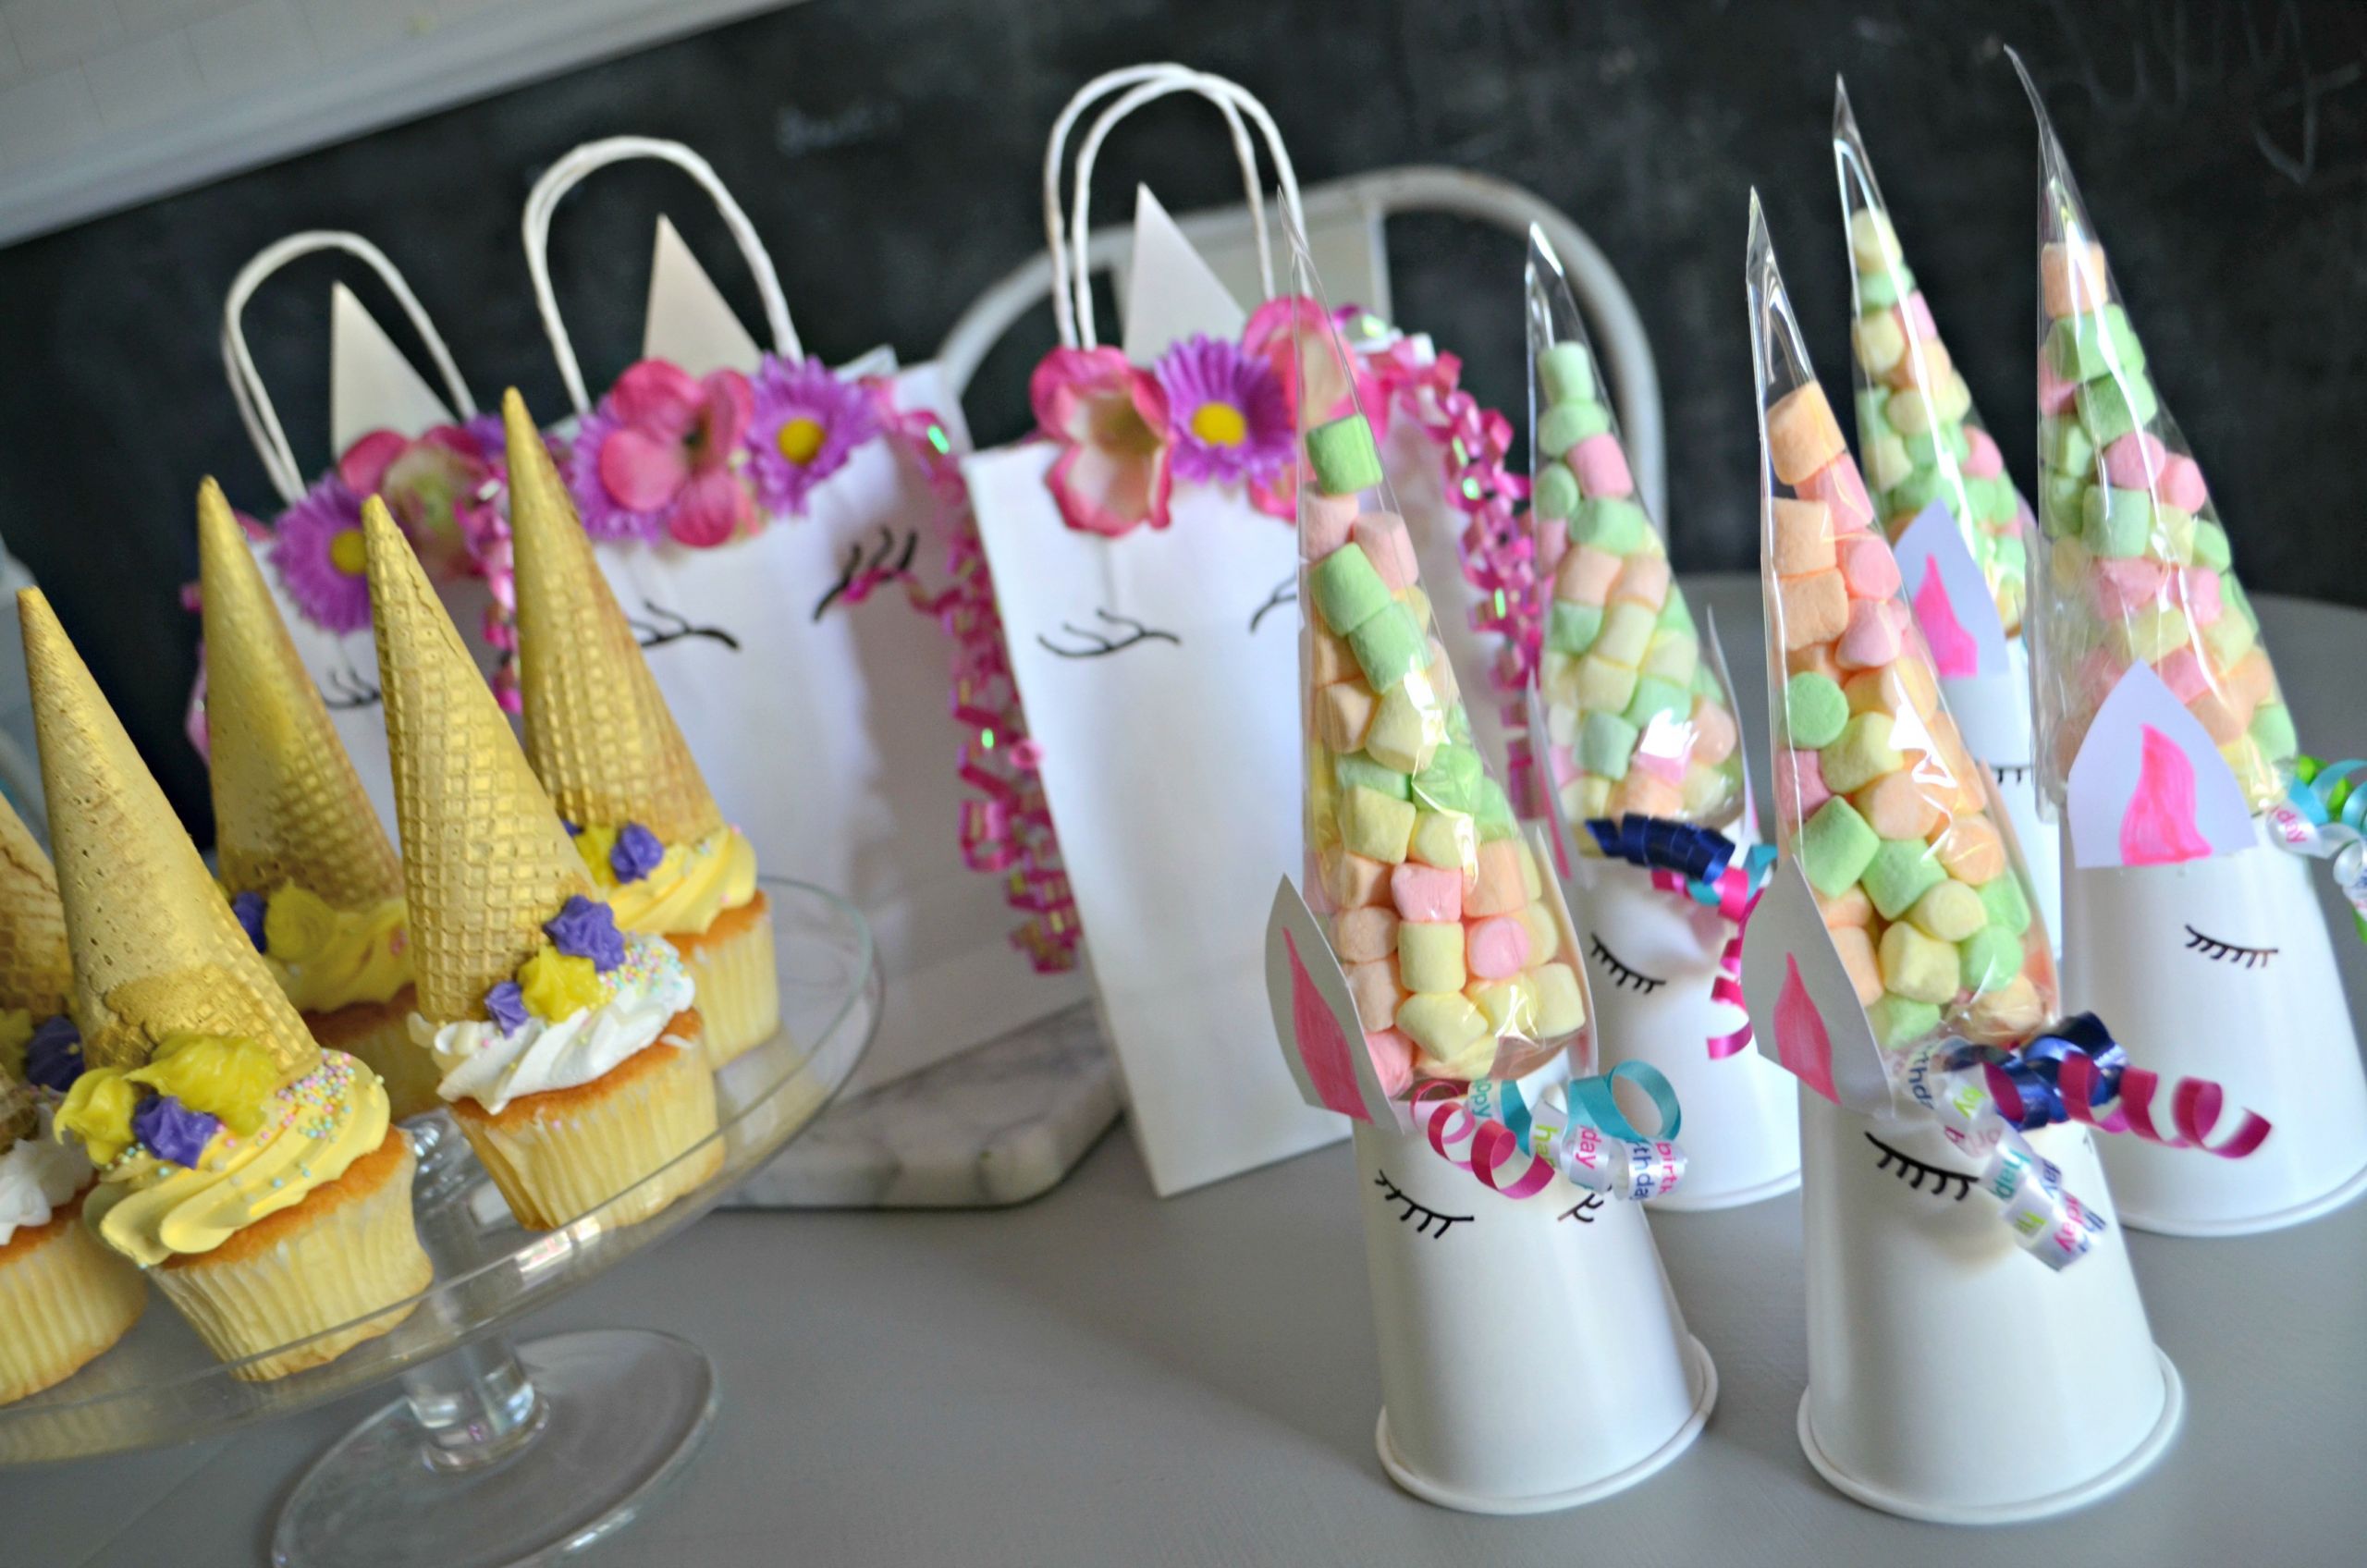 Unicorn Party Food Ideas Pony Tails
 Make These 3 Frugal Cute and Easy DIY Unicorn Birthday